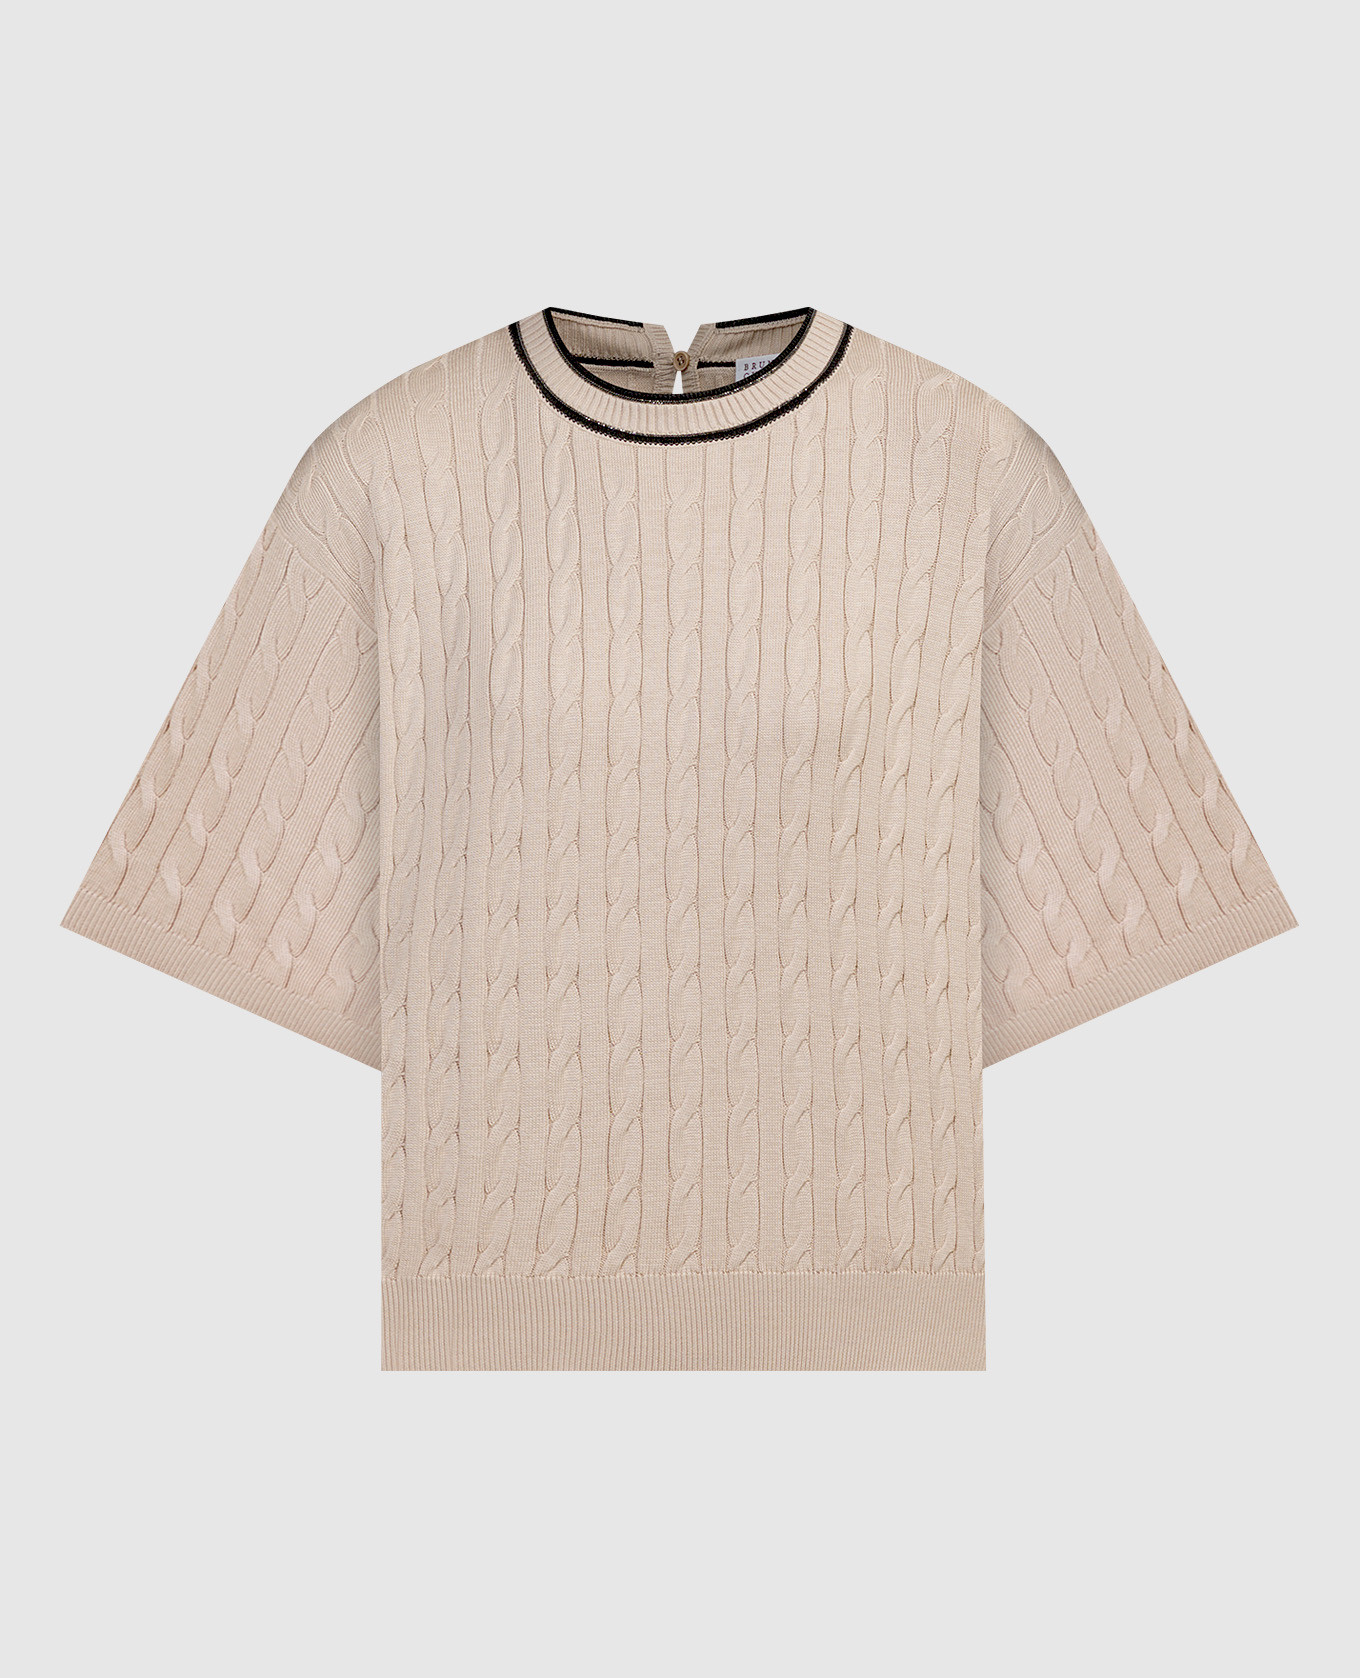 Beige t-shirt with a monil chain in a textured pattern